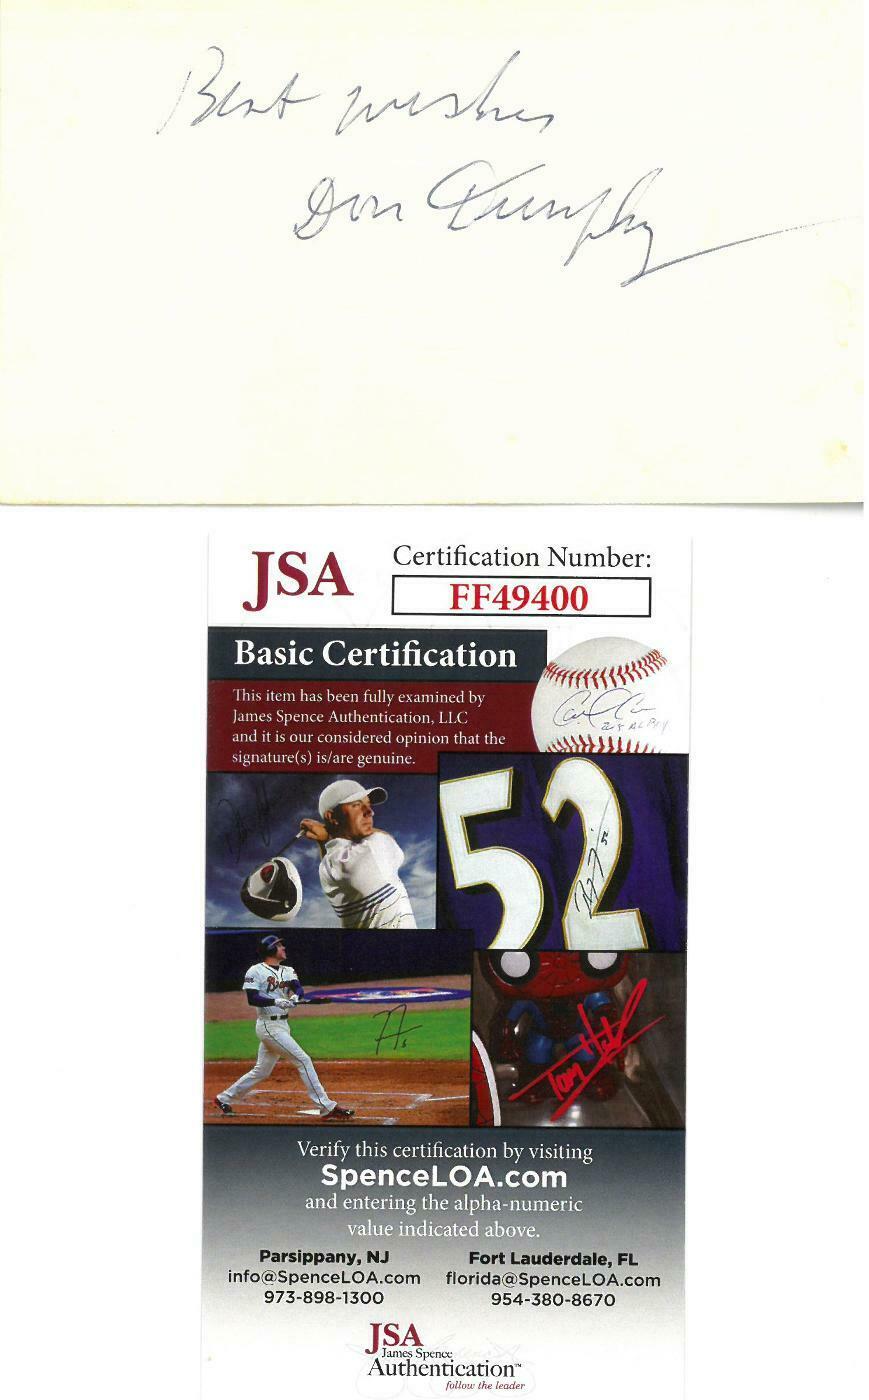 Don Dunphy Signed Authentic Autographed 3x5 Cream Index Card Jsa #ff49400